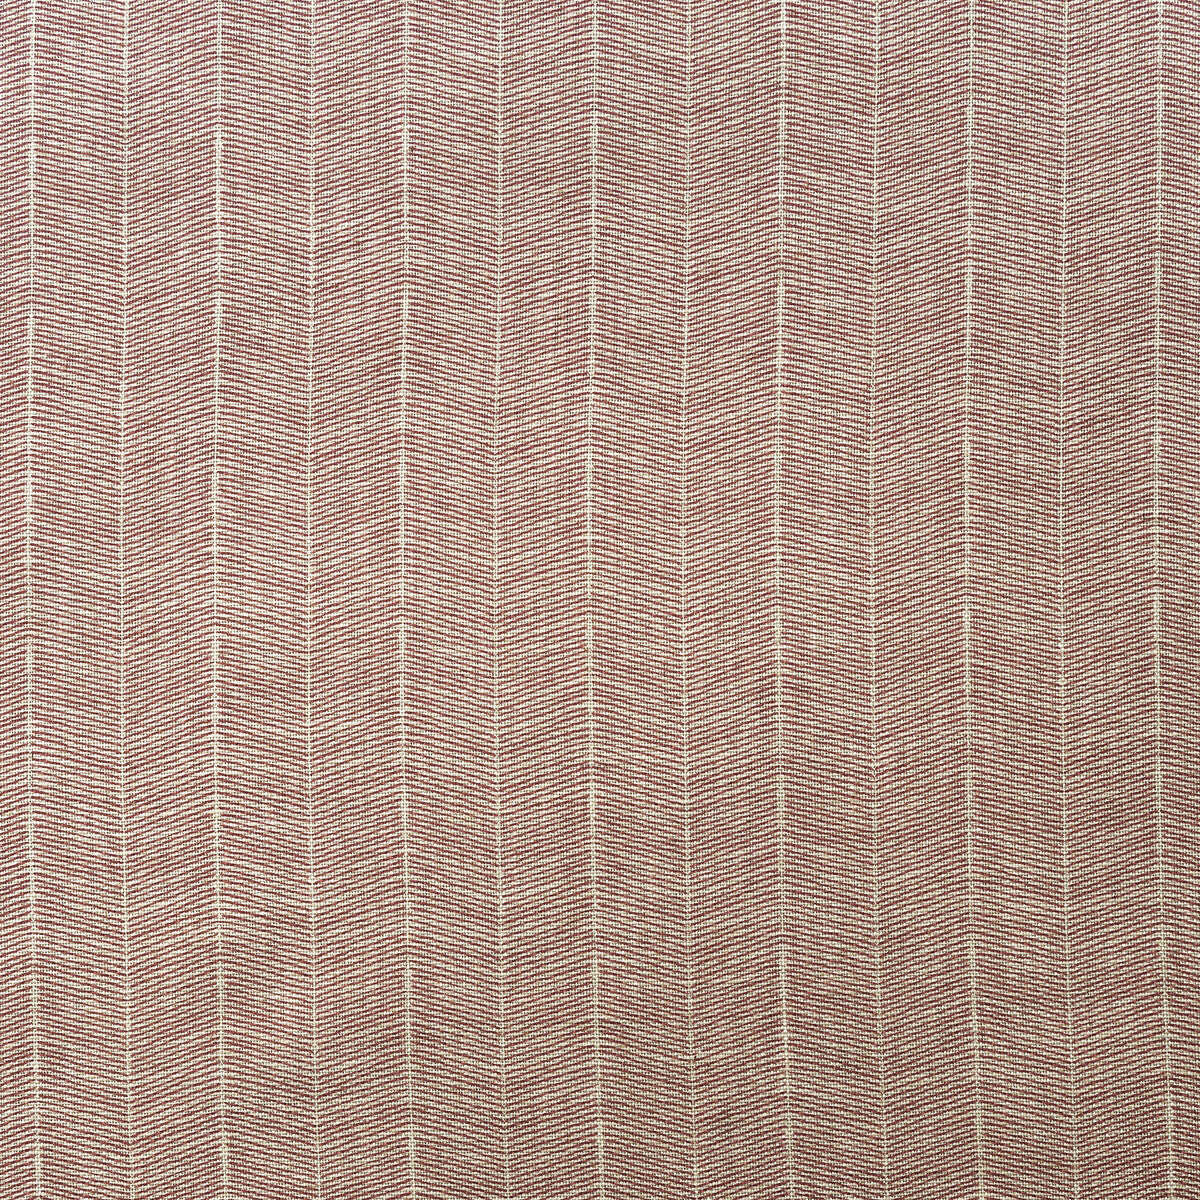 Furrow fabric in pink color - pattern AM100380.77.0 - by Kravet Couture in the Andrew Martin Garden Path collection